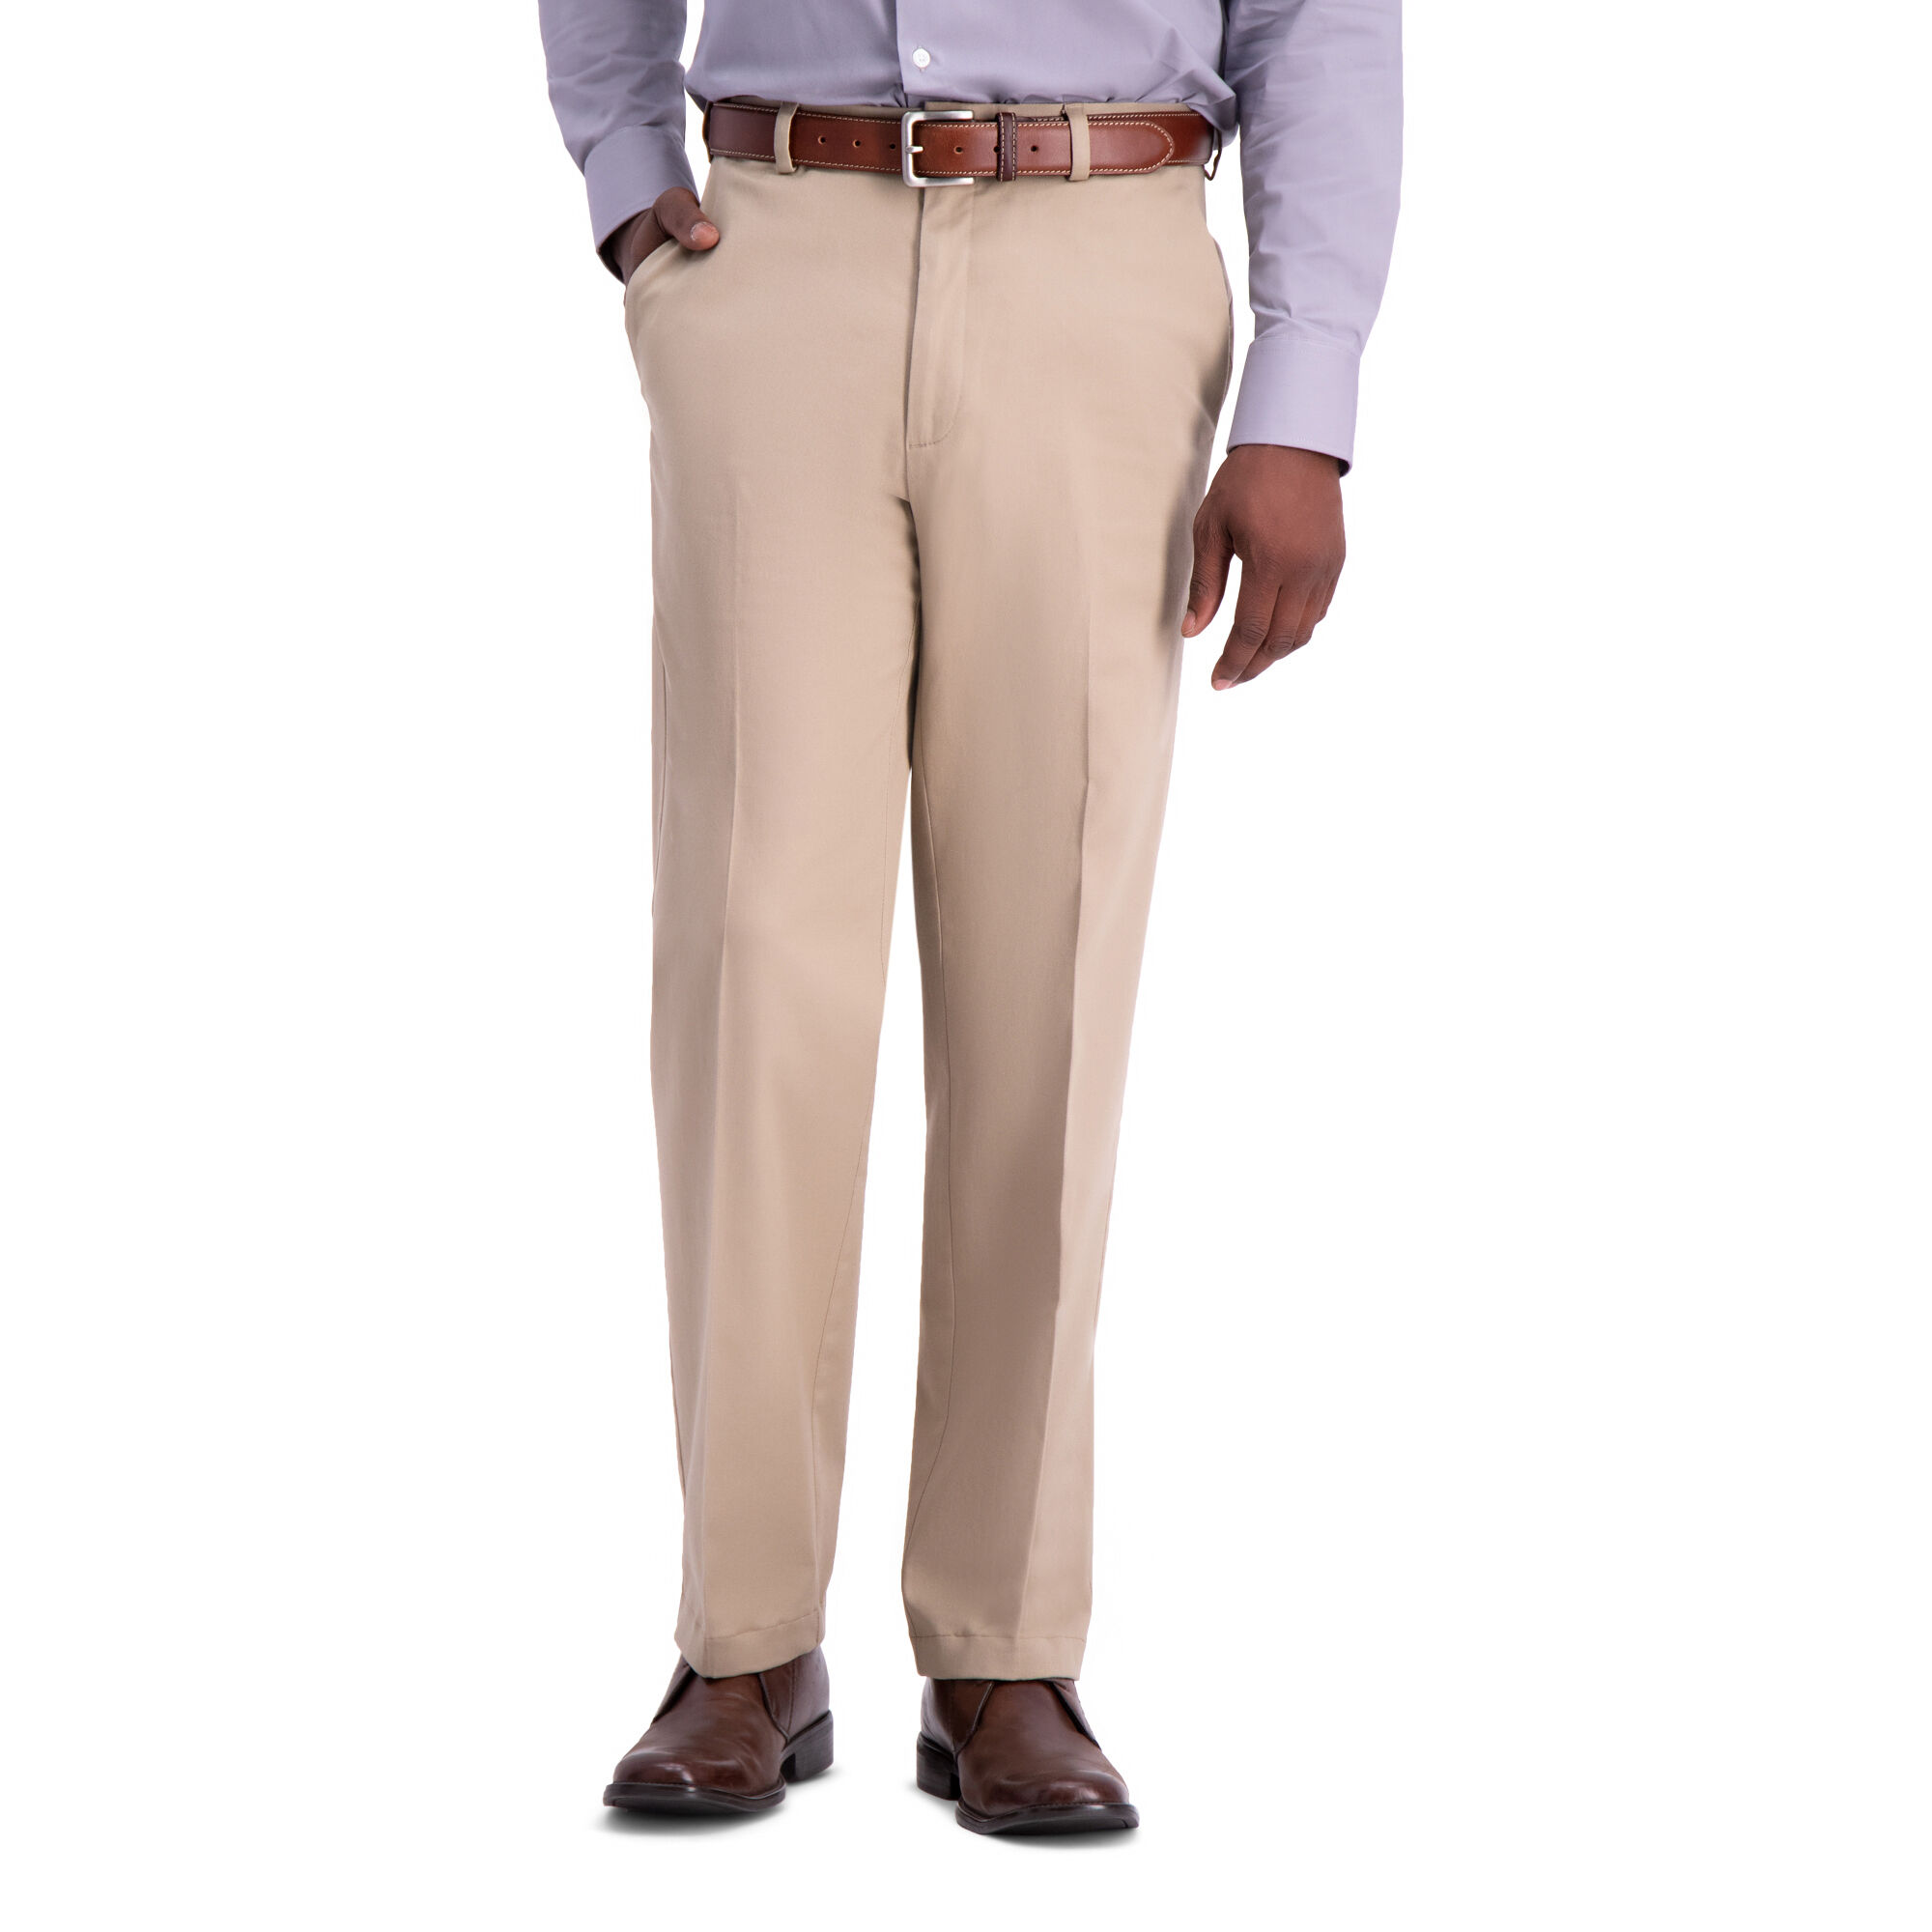 Men's Relaxed Fit Pants - Shop Relaxed 